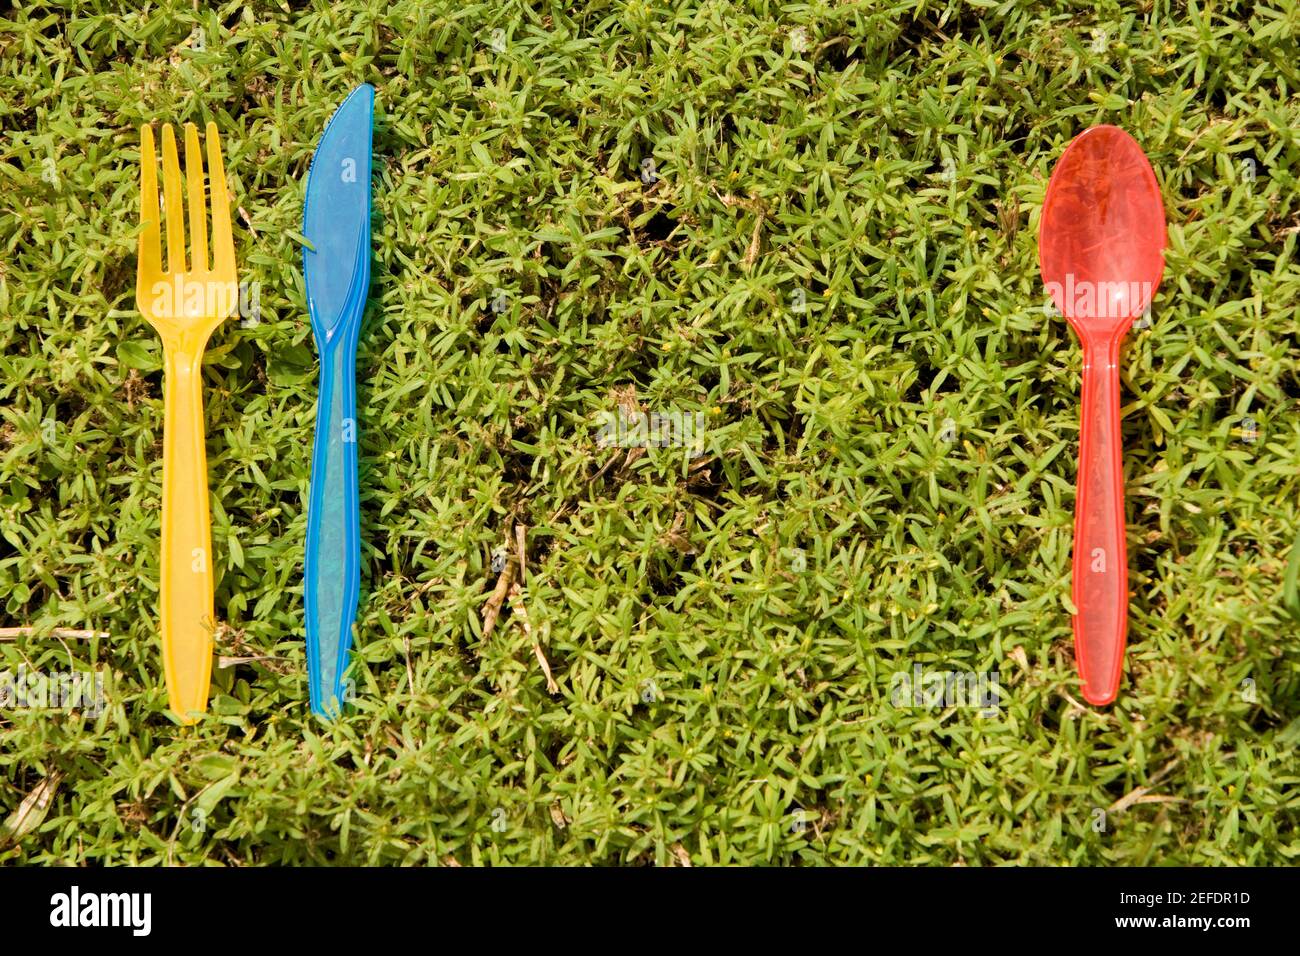 Close-up of a plastic spoon with a plastic knife and a plastic fork lying on the grass Stock Photo